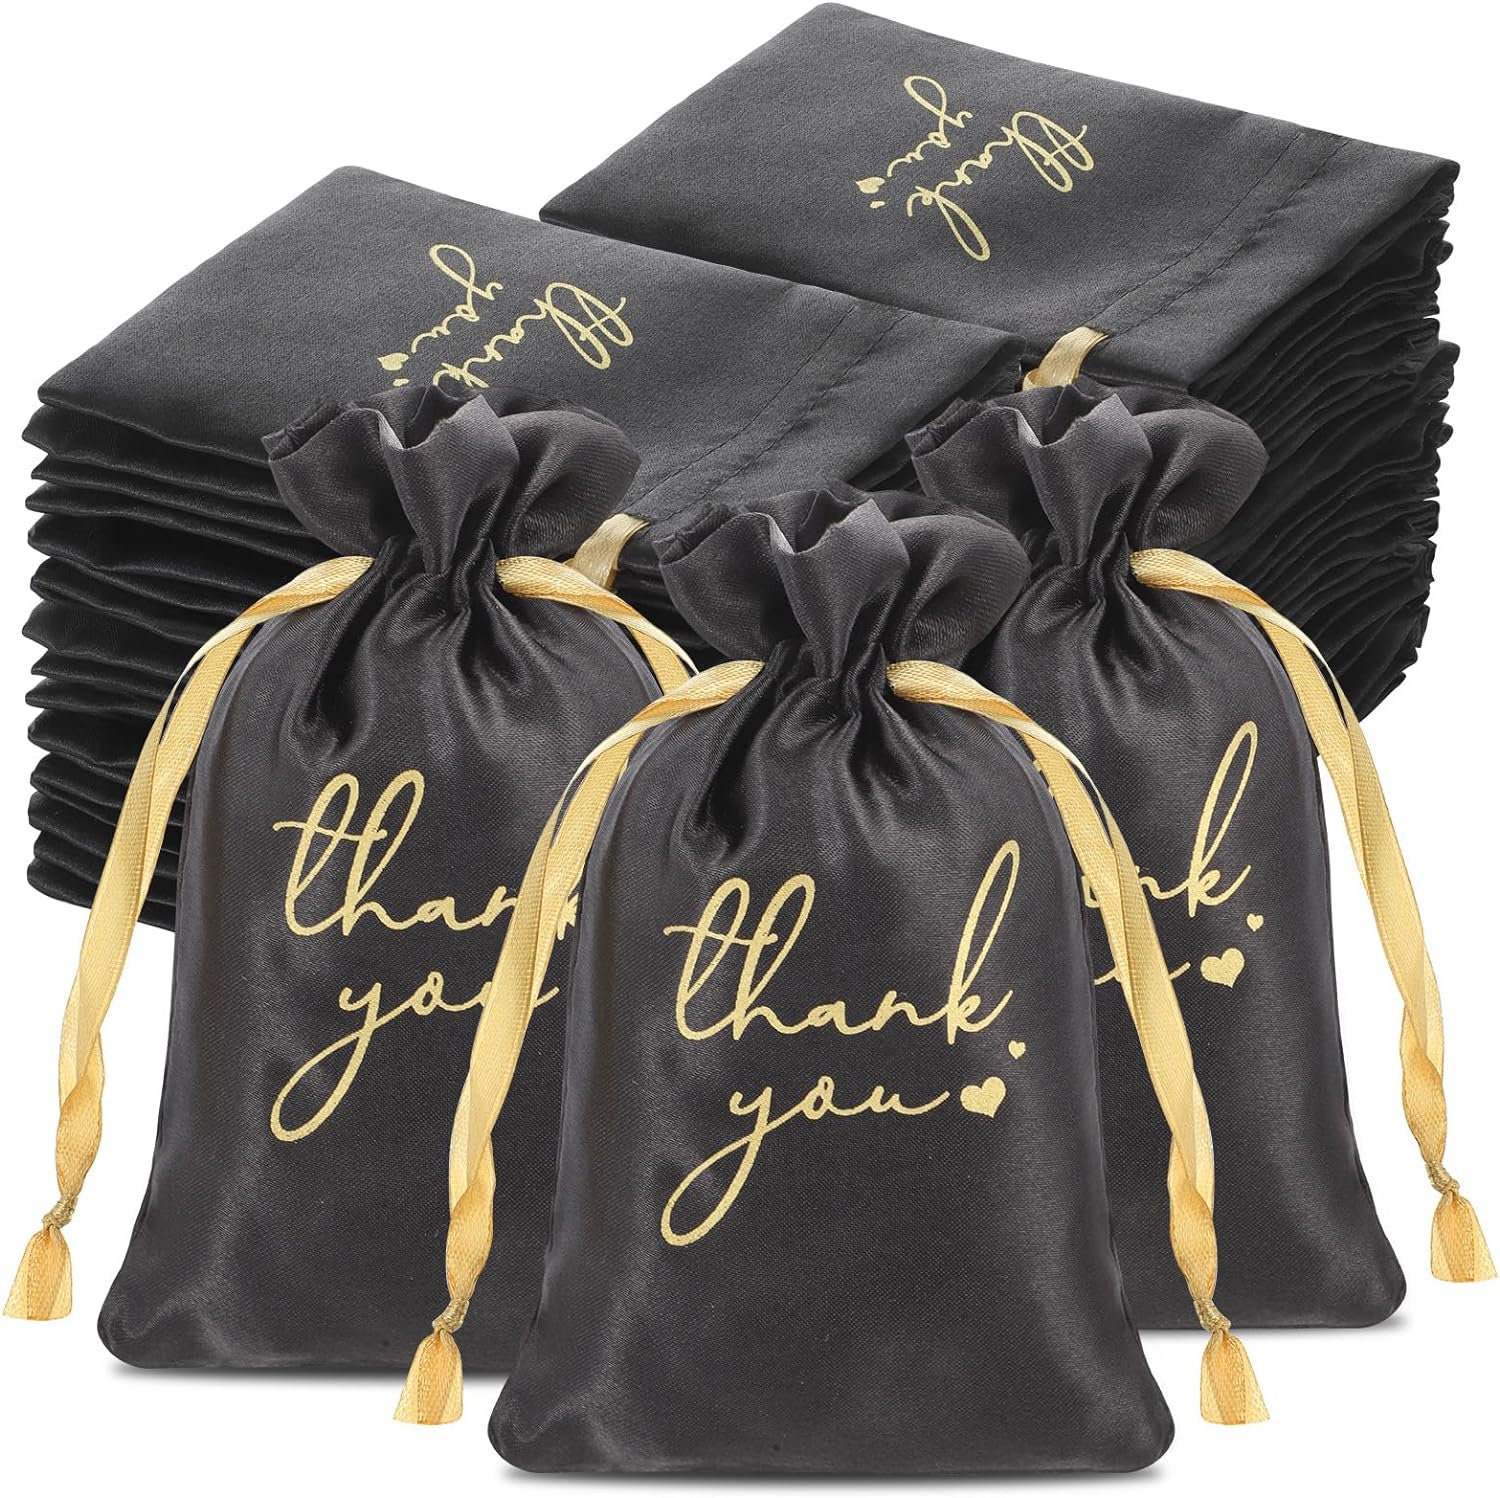 20 Black & Gold Monogram Birthday Party Favor Bags for Guests With Satin  Ribbon Handles and Name, Personalized 30th Anniversary Gift Bag 